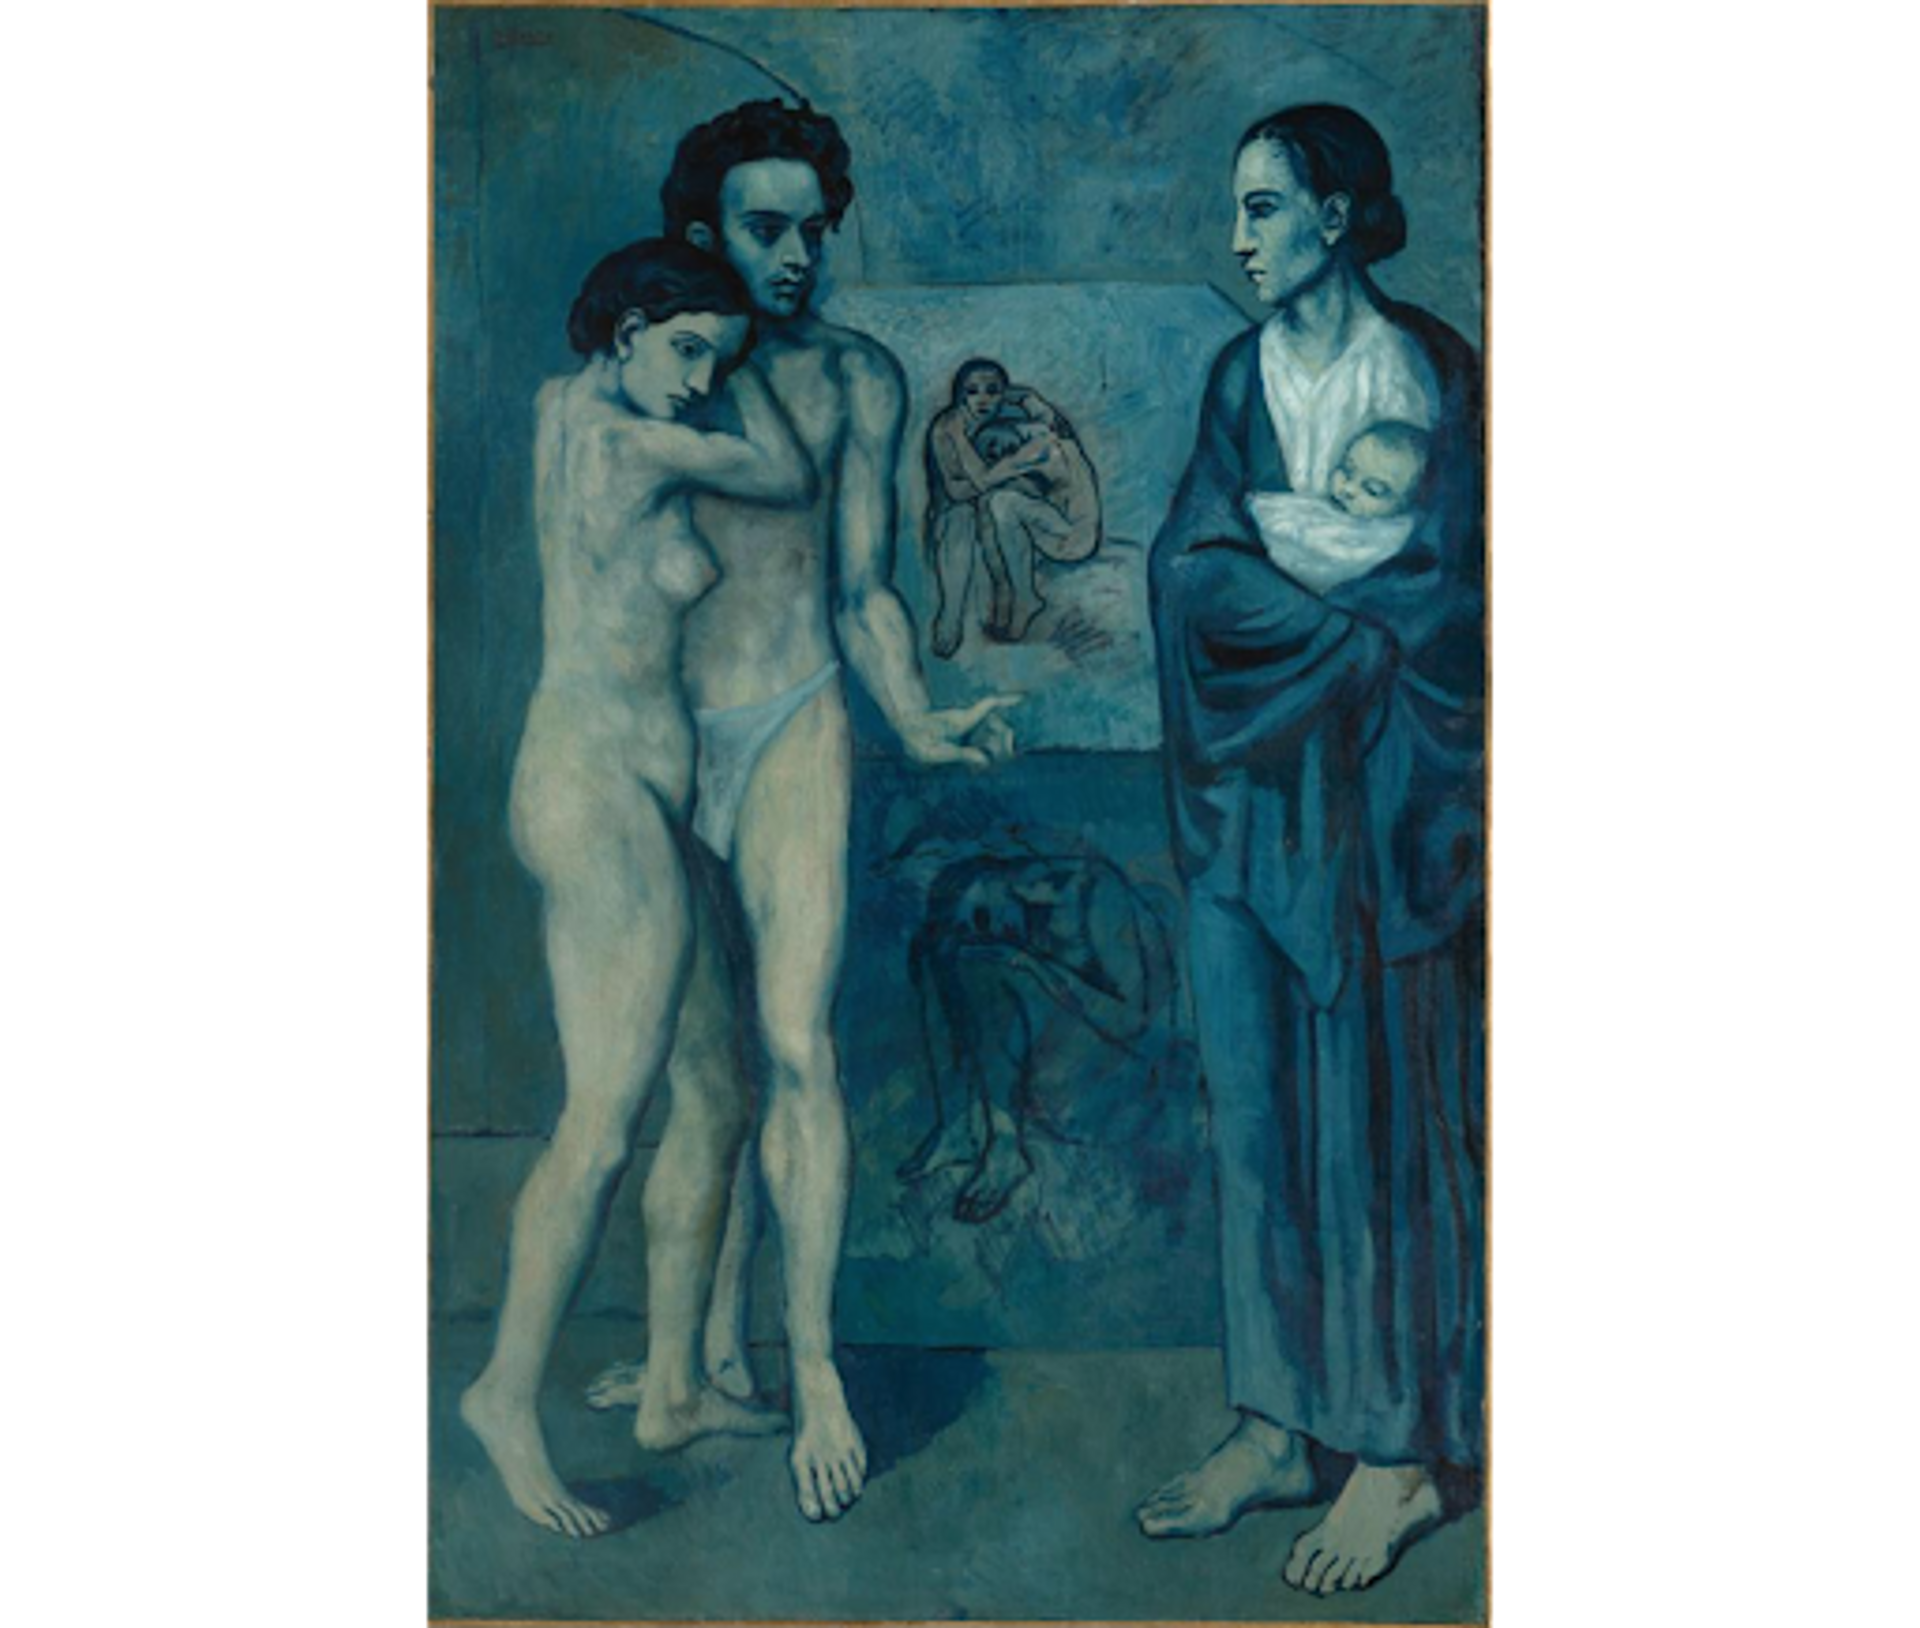 Pablo Picasso's La Vie. A Blue Period painting of an unclothed couple on the left and a woman holding a baby on the right with two artworks in the background. 